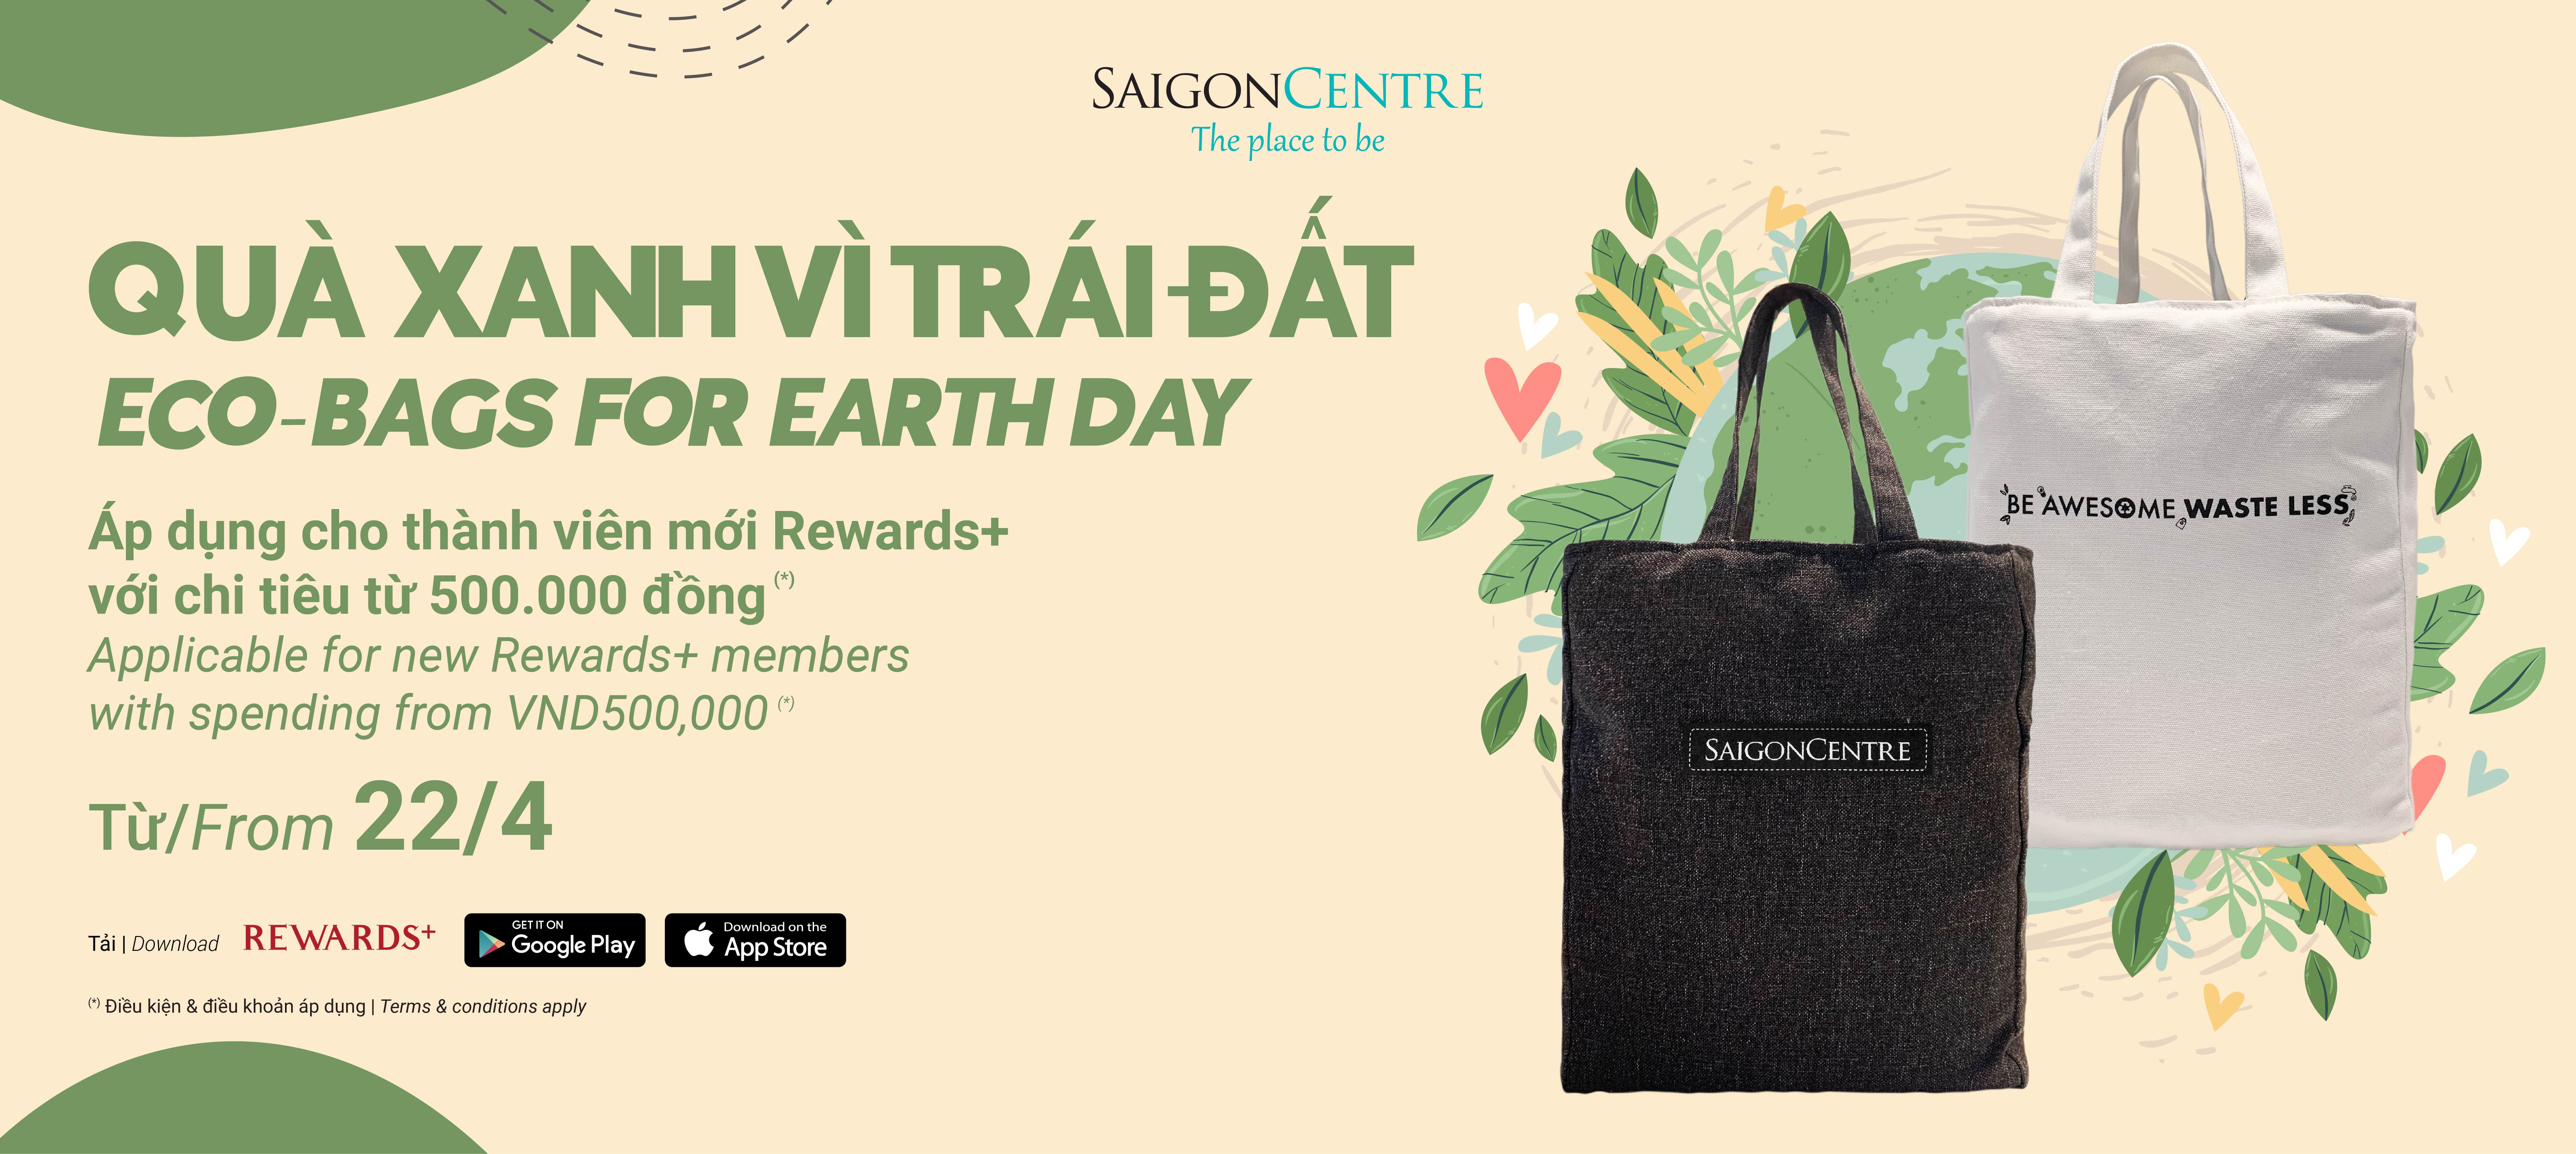 ECO-BAGS FOR EARTH DAY